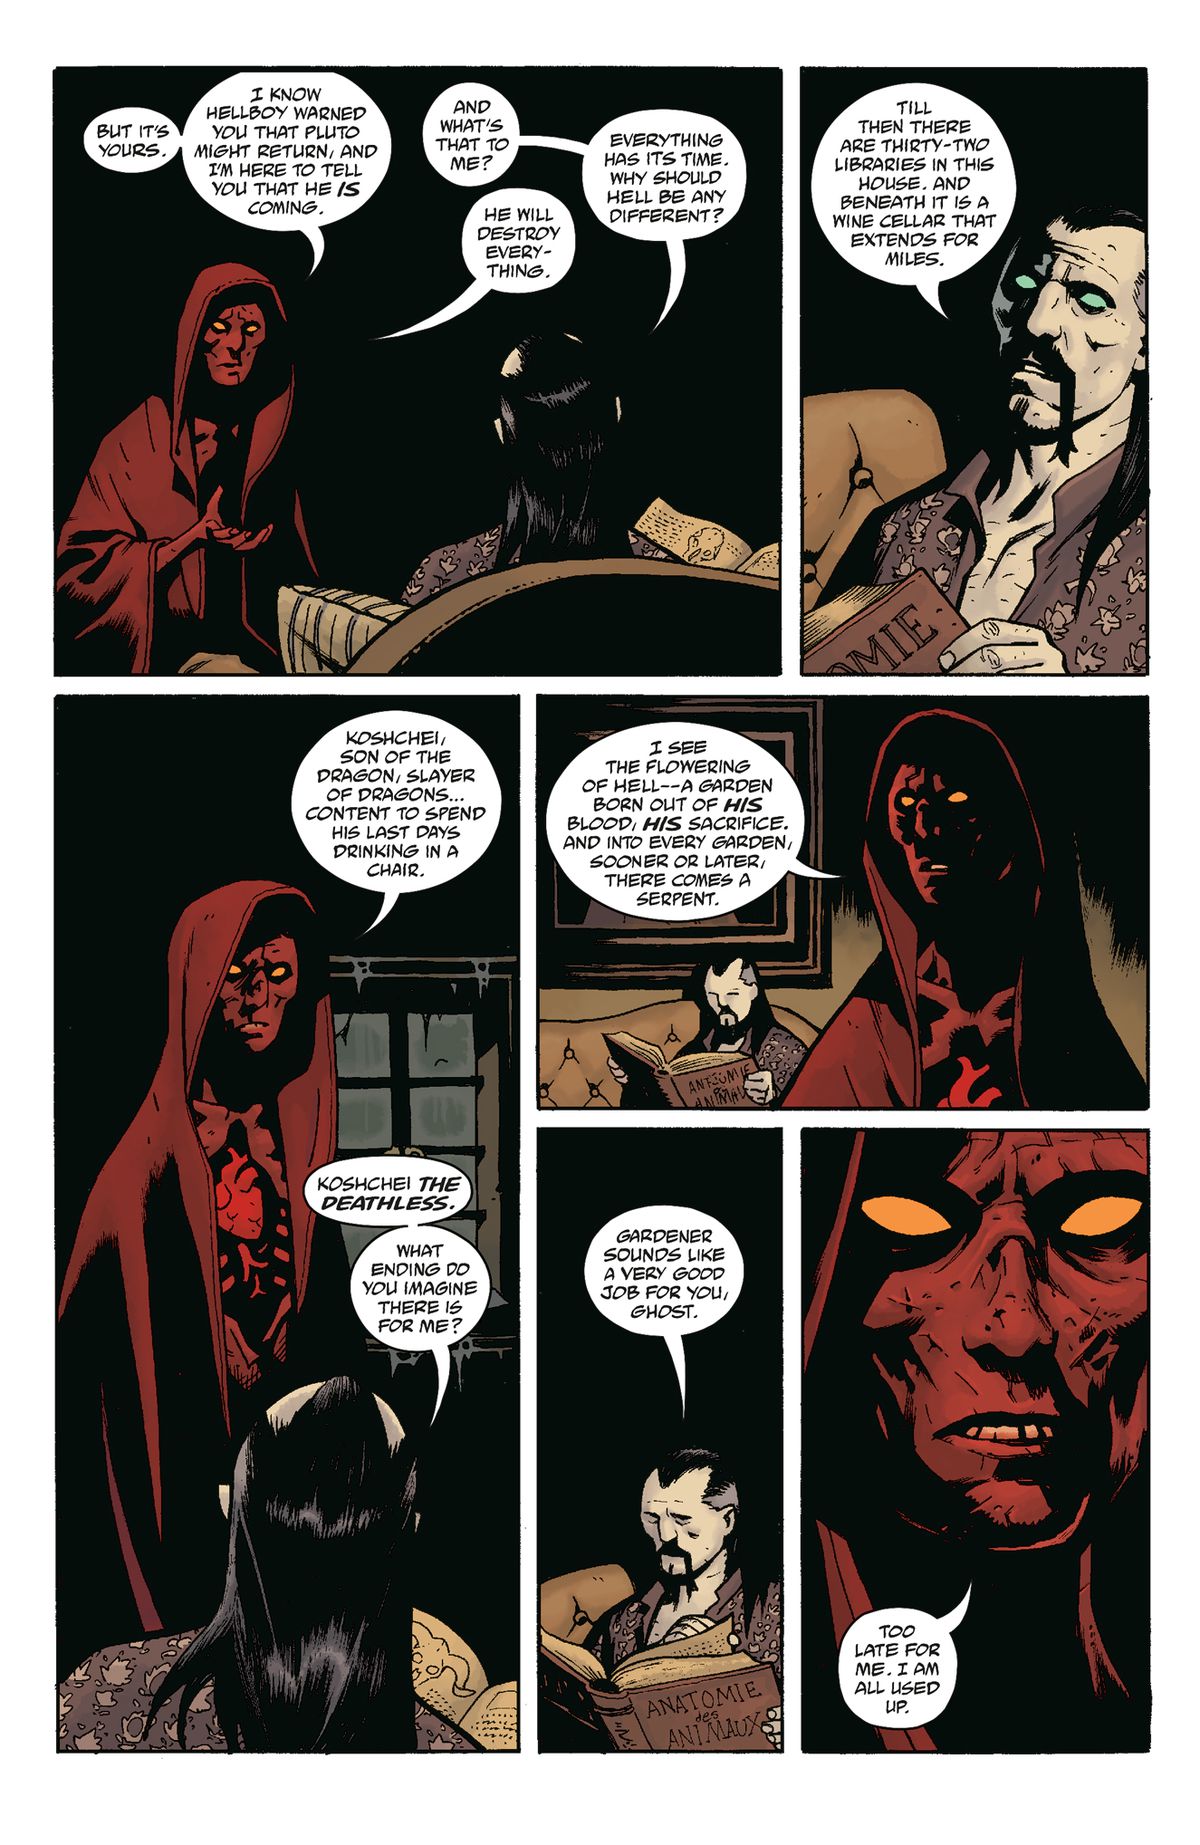 Koshchei and a “ghost” discuss Pluto’s inevitable return in Koshchei in Hell #1 (2022).